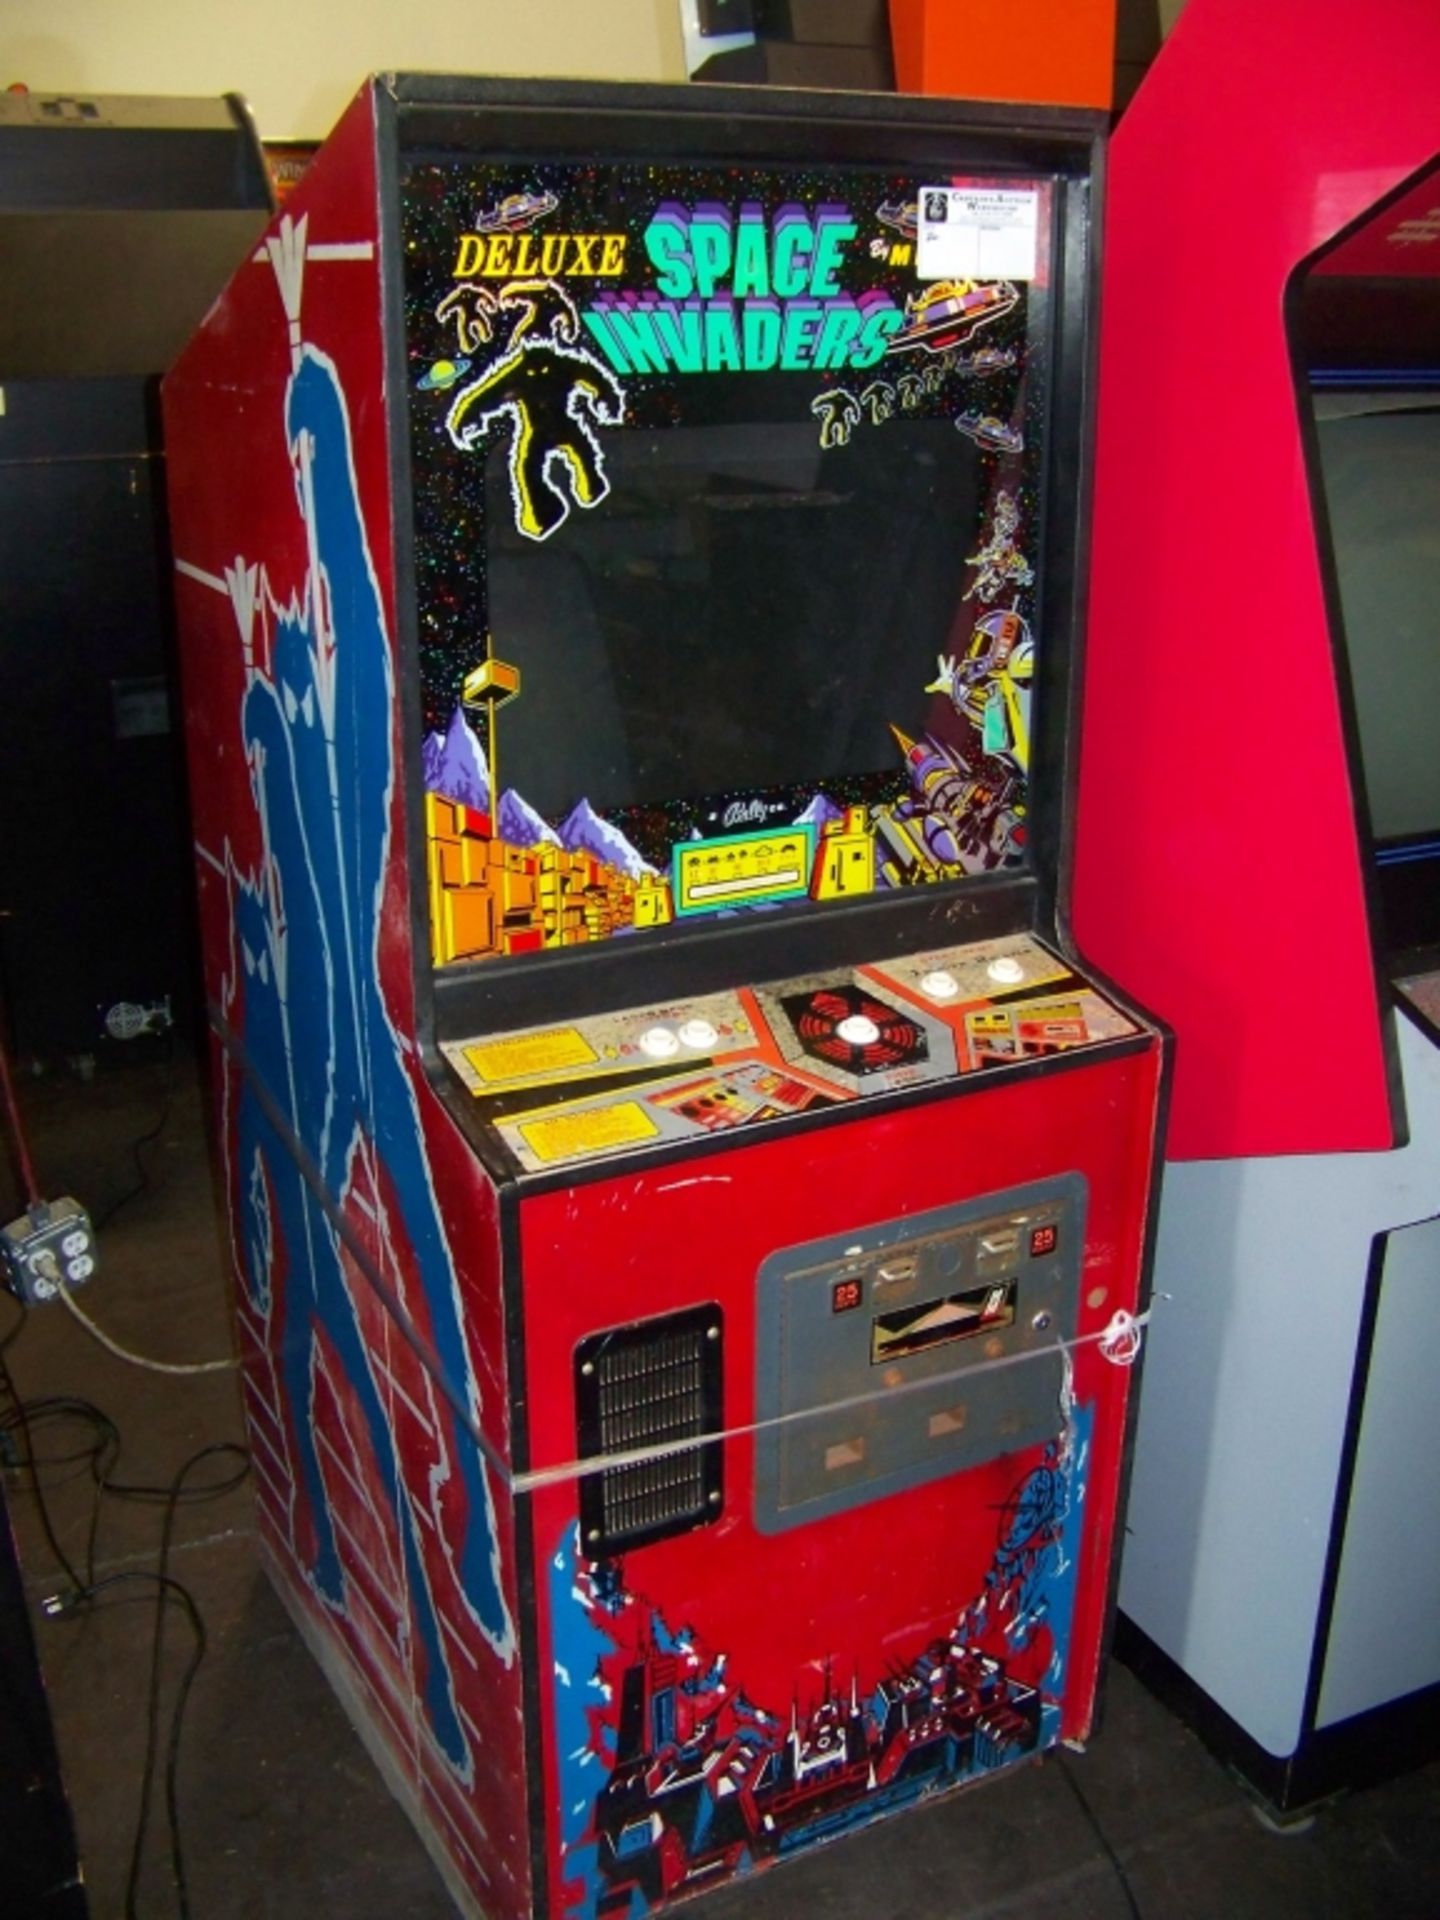 SPACE INVADERS DELUXE UPRIGHT ARCADE GAME BALLY - Image 2 of 2